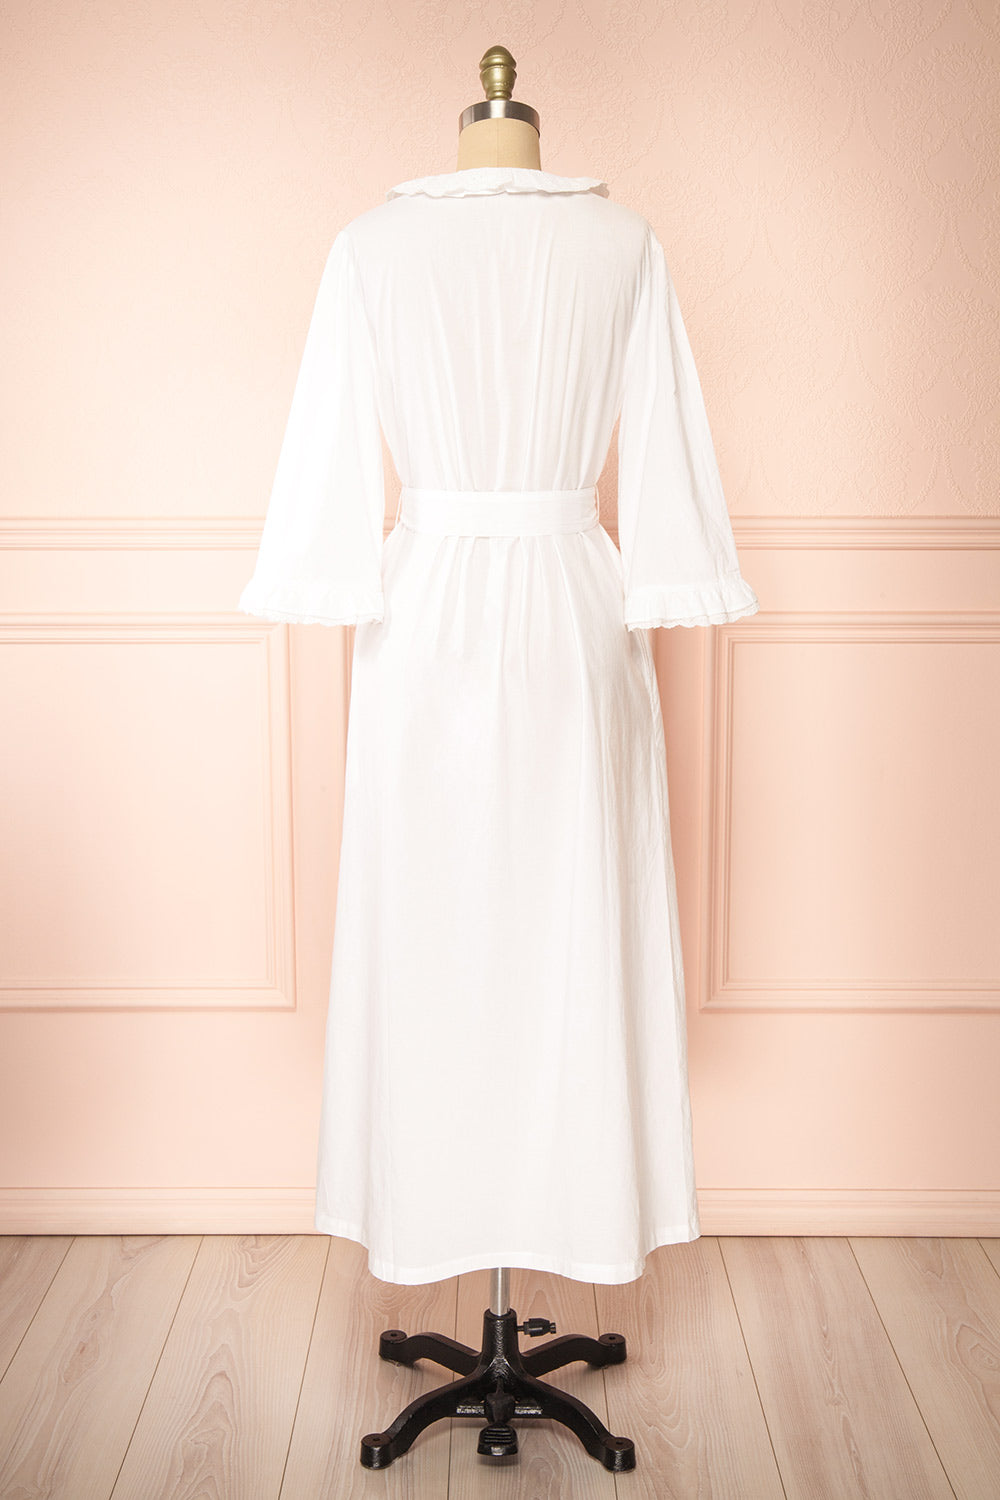 Matilda White Dressing Gown w/ Pockets | Boutique 1861 back view